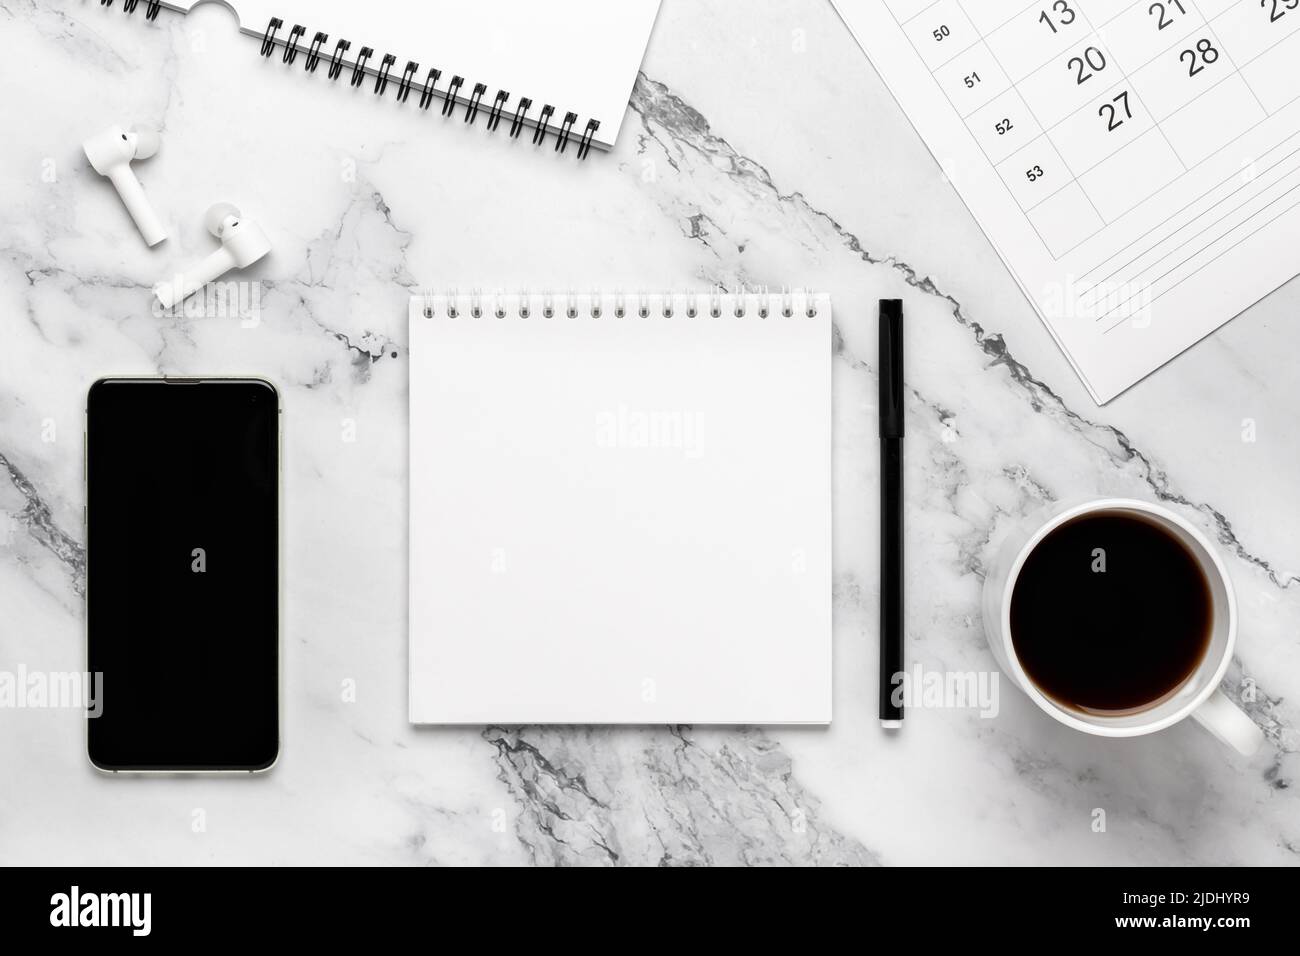 Cup of coffee, phone, headphones, calendar and notebook paper on the marble table. Black and white background with copy space, mockup. Flat design, pl Stock Photo